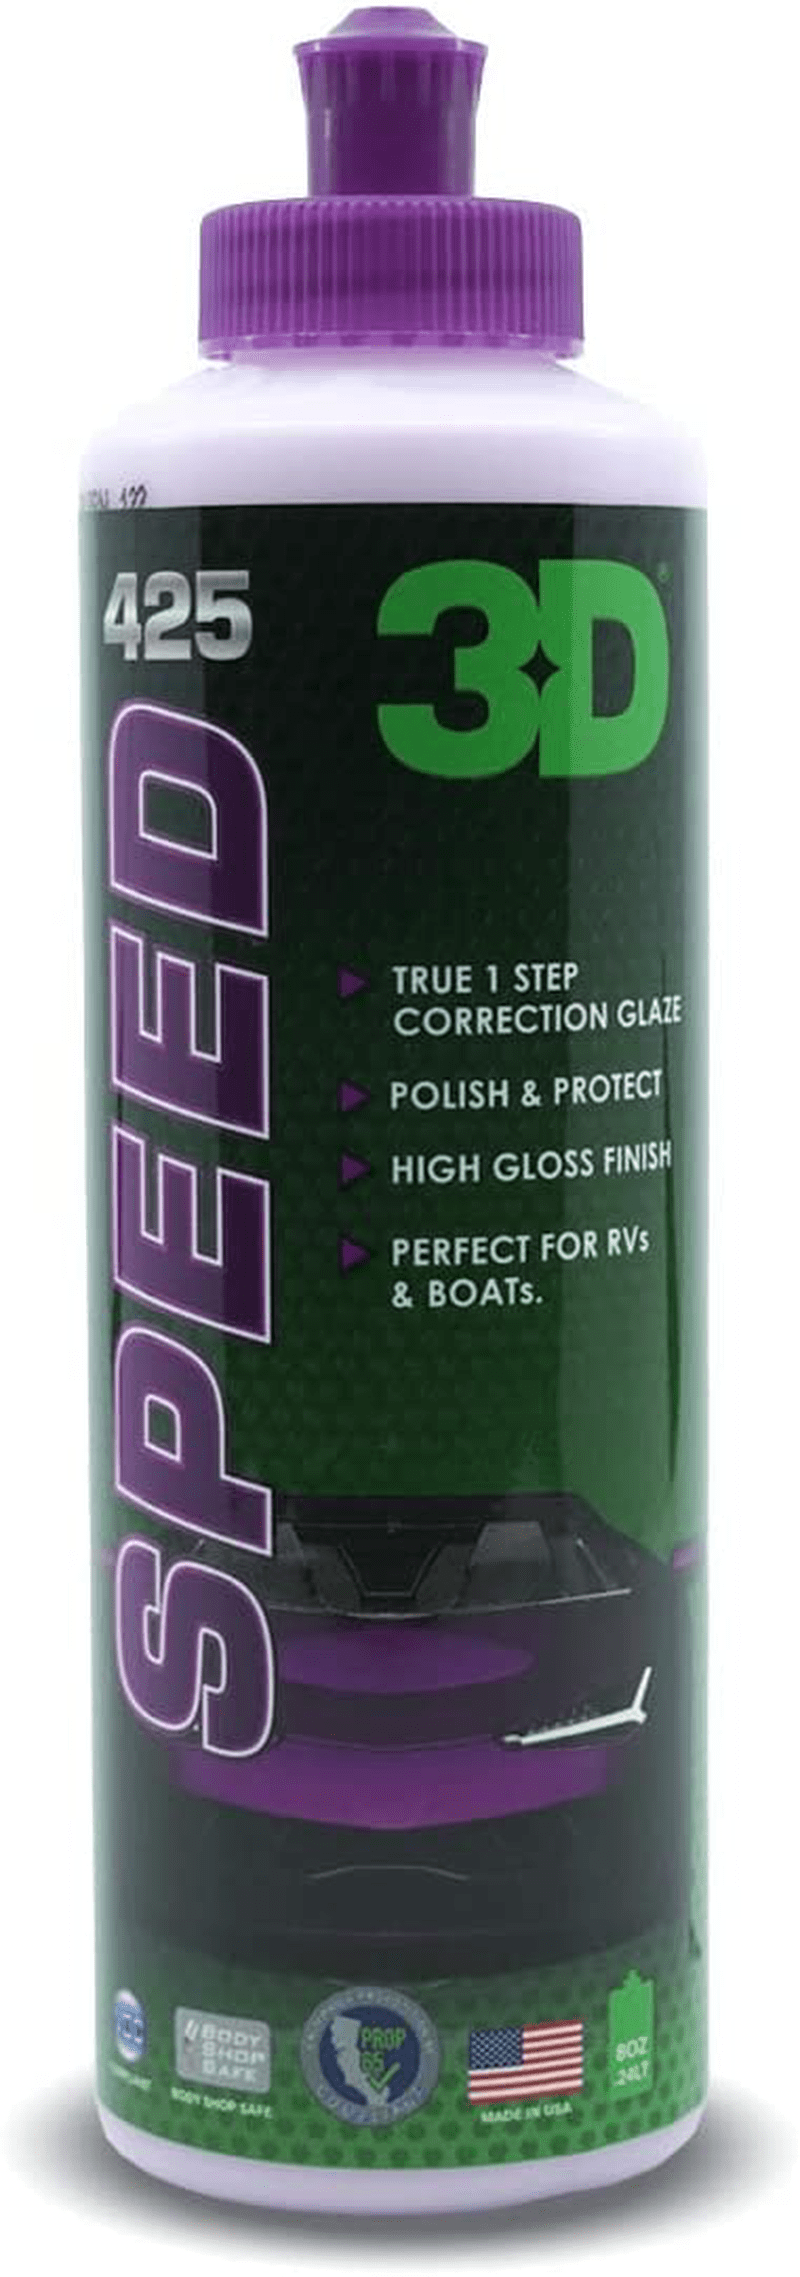 3D Speed Car Polish & Wax – 16oz – All-In-One Scratch Remover & Swirl Correction with Wax Protection Vehicles & Parts > Vehicle Parts & Accessories > Vehicle Maintenance, Care & Decor > Vehicle Paint 3D 8 oz.  